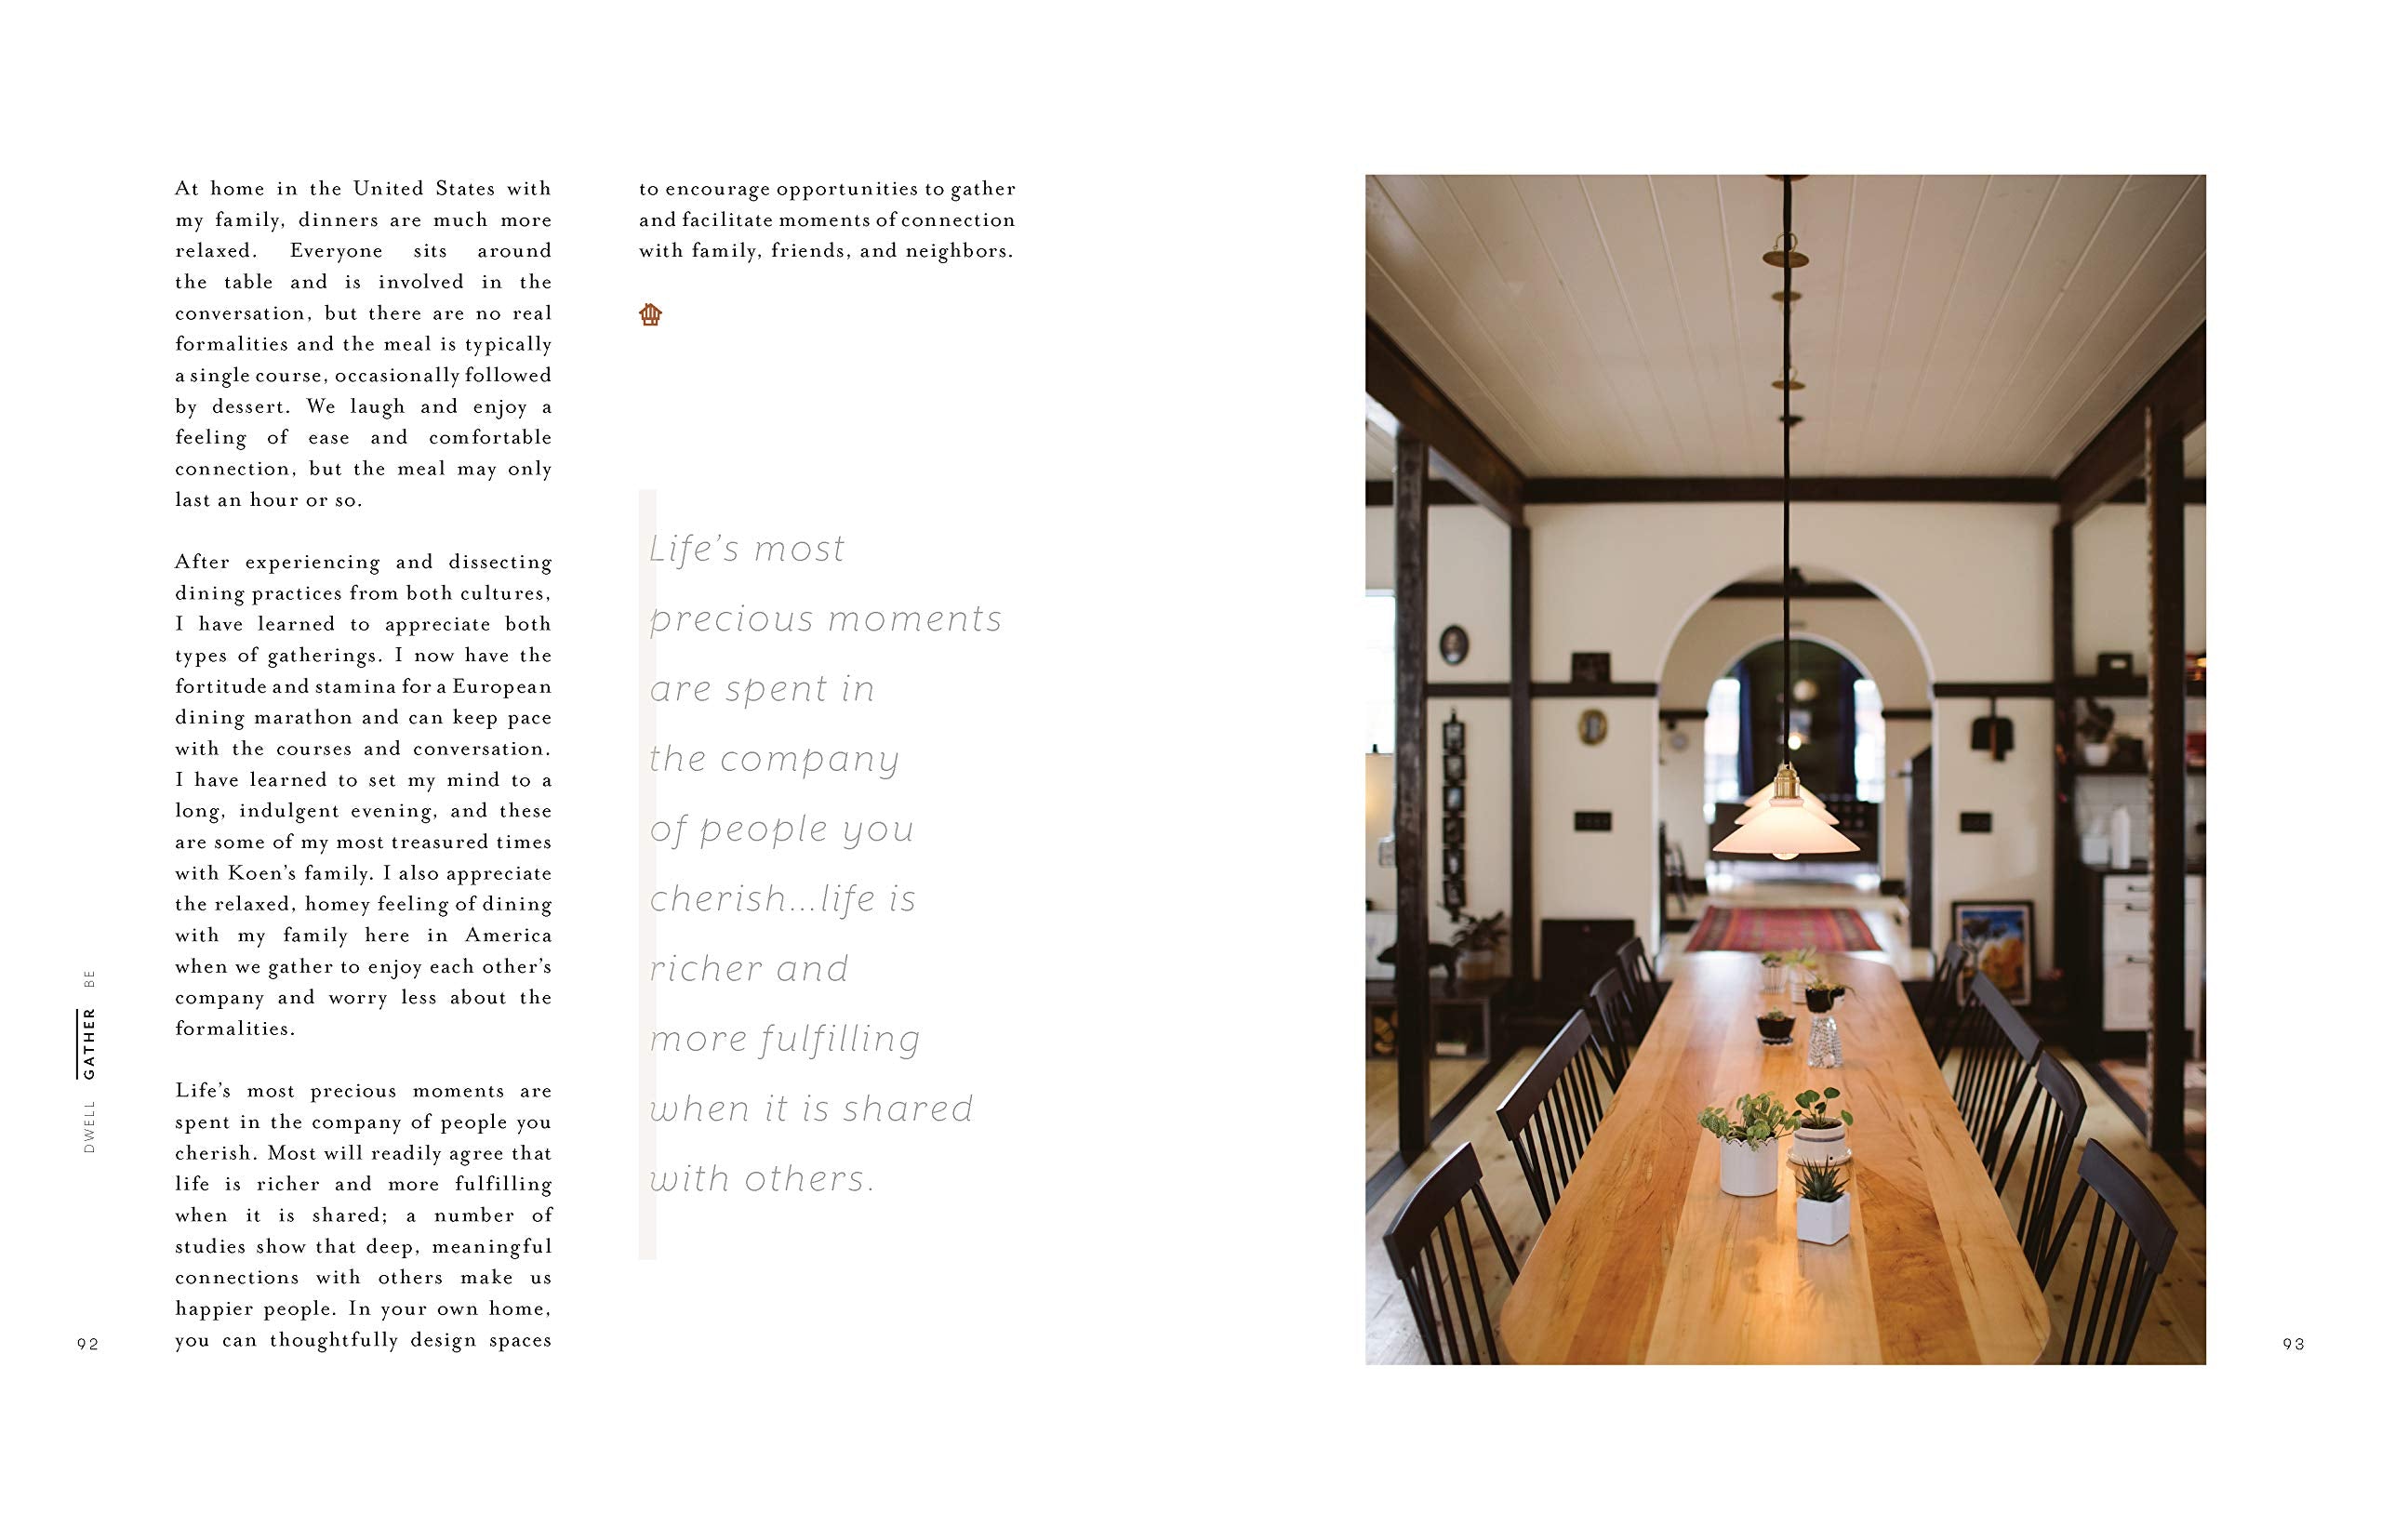 Dwell, Gather, Be: Design for Moments